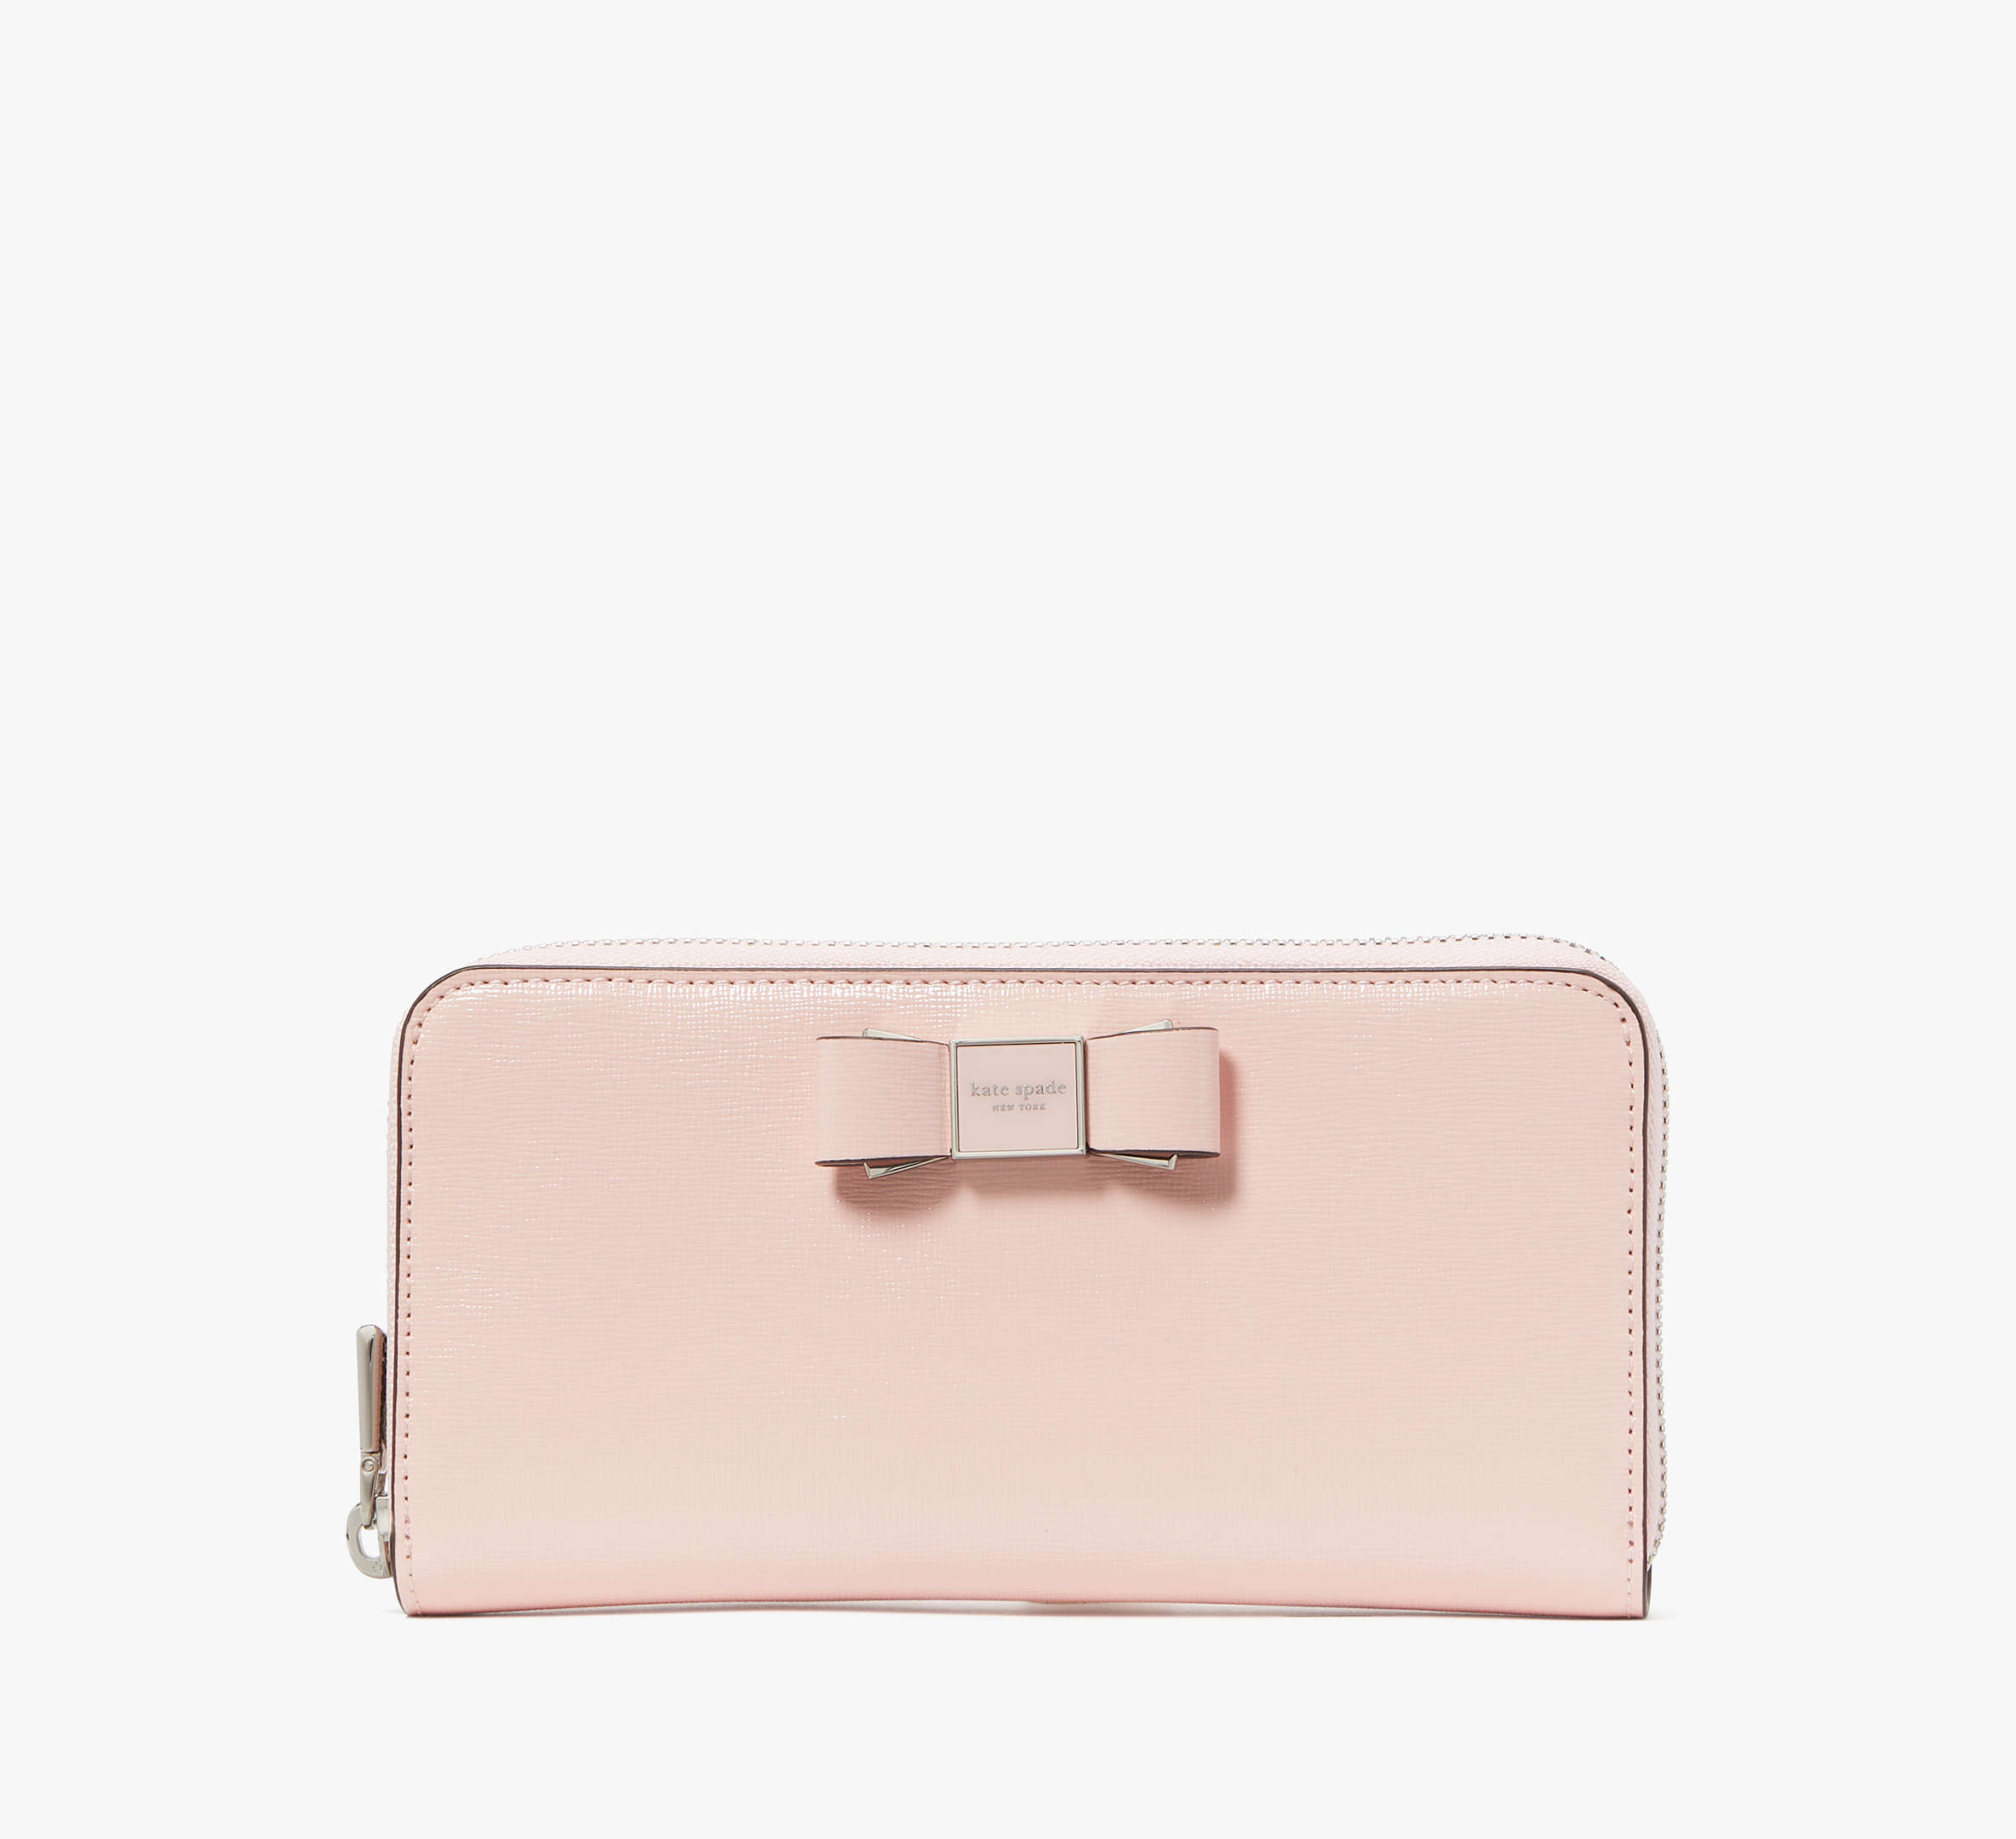 Kate Spade Morgan Bow Embellished Patent Leather Zip-around Wallet In Crepe Pink